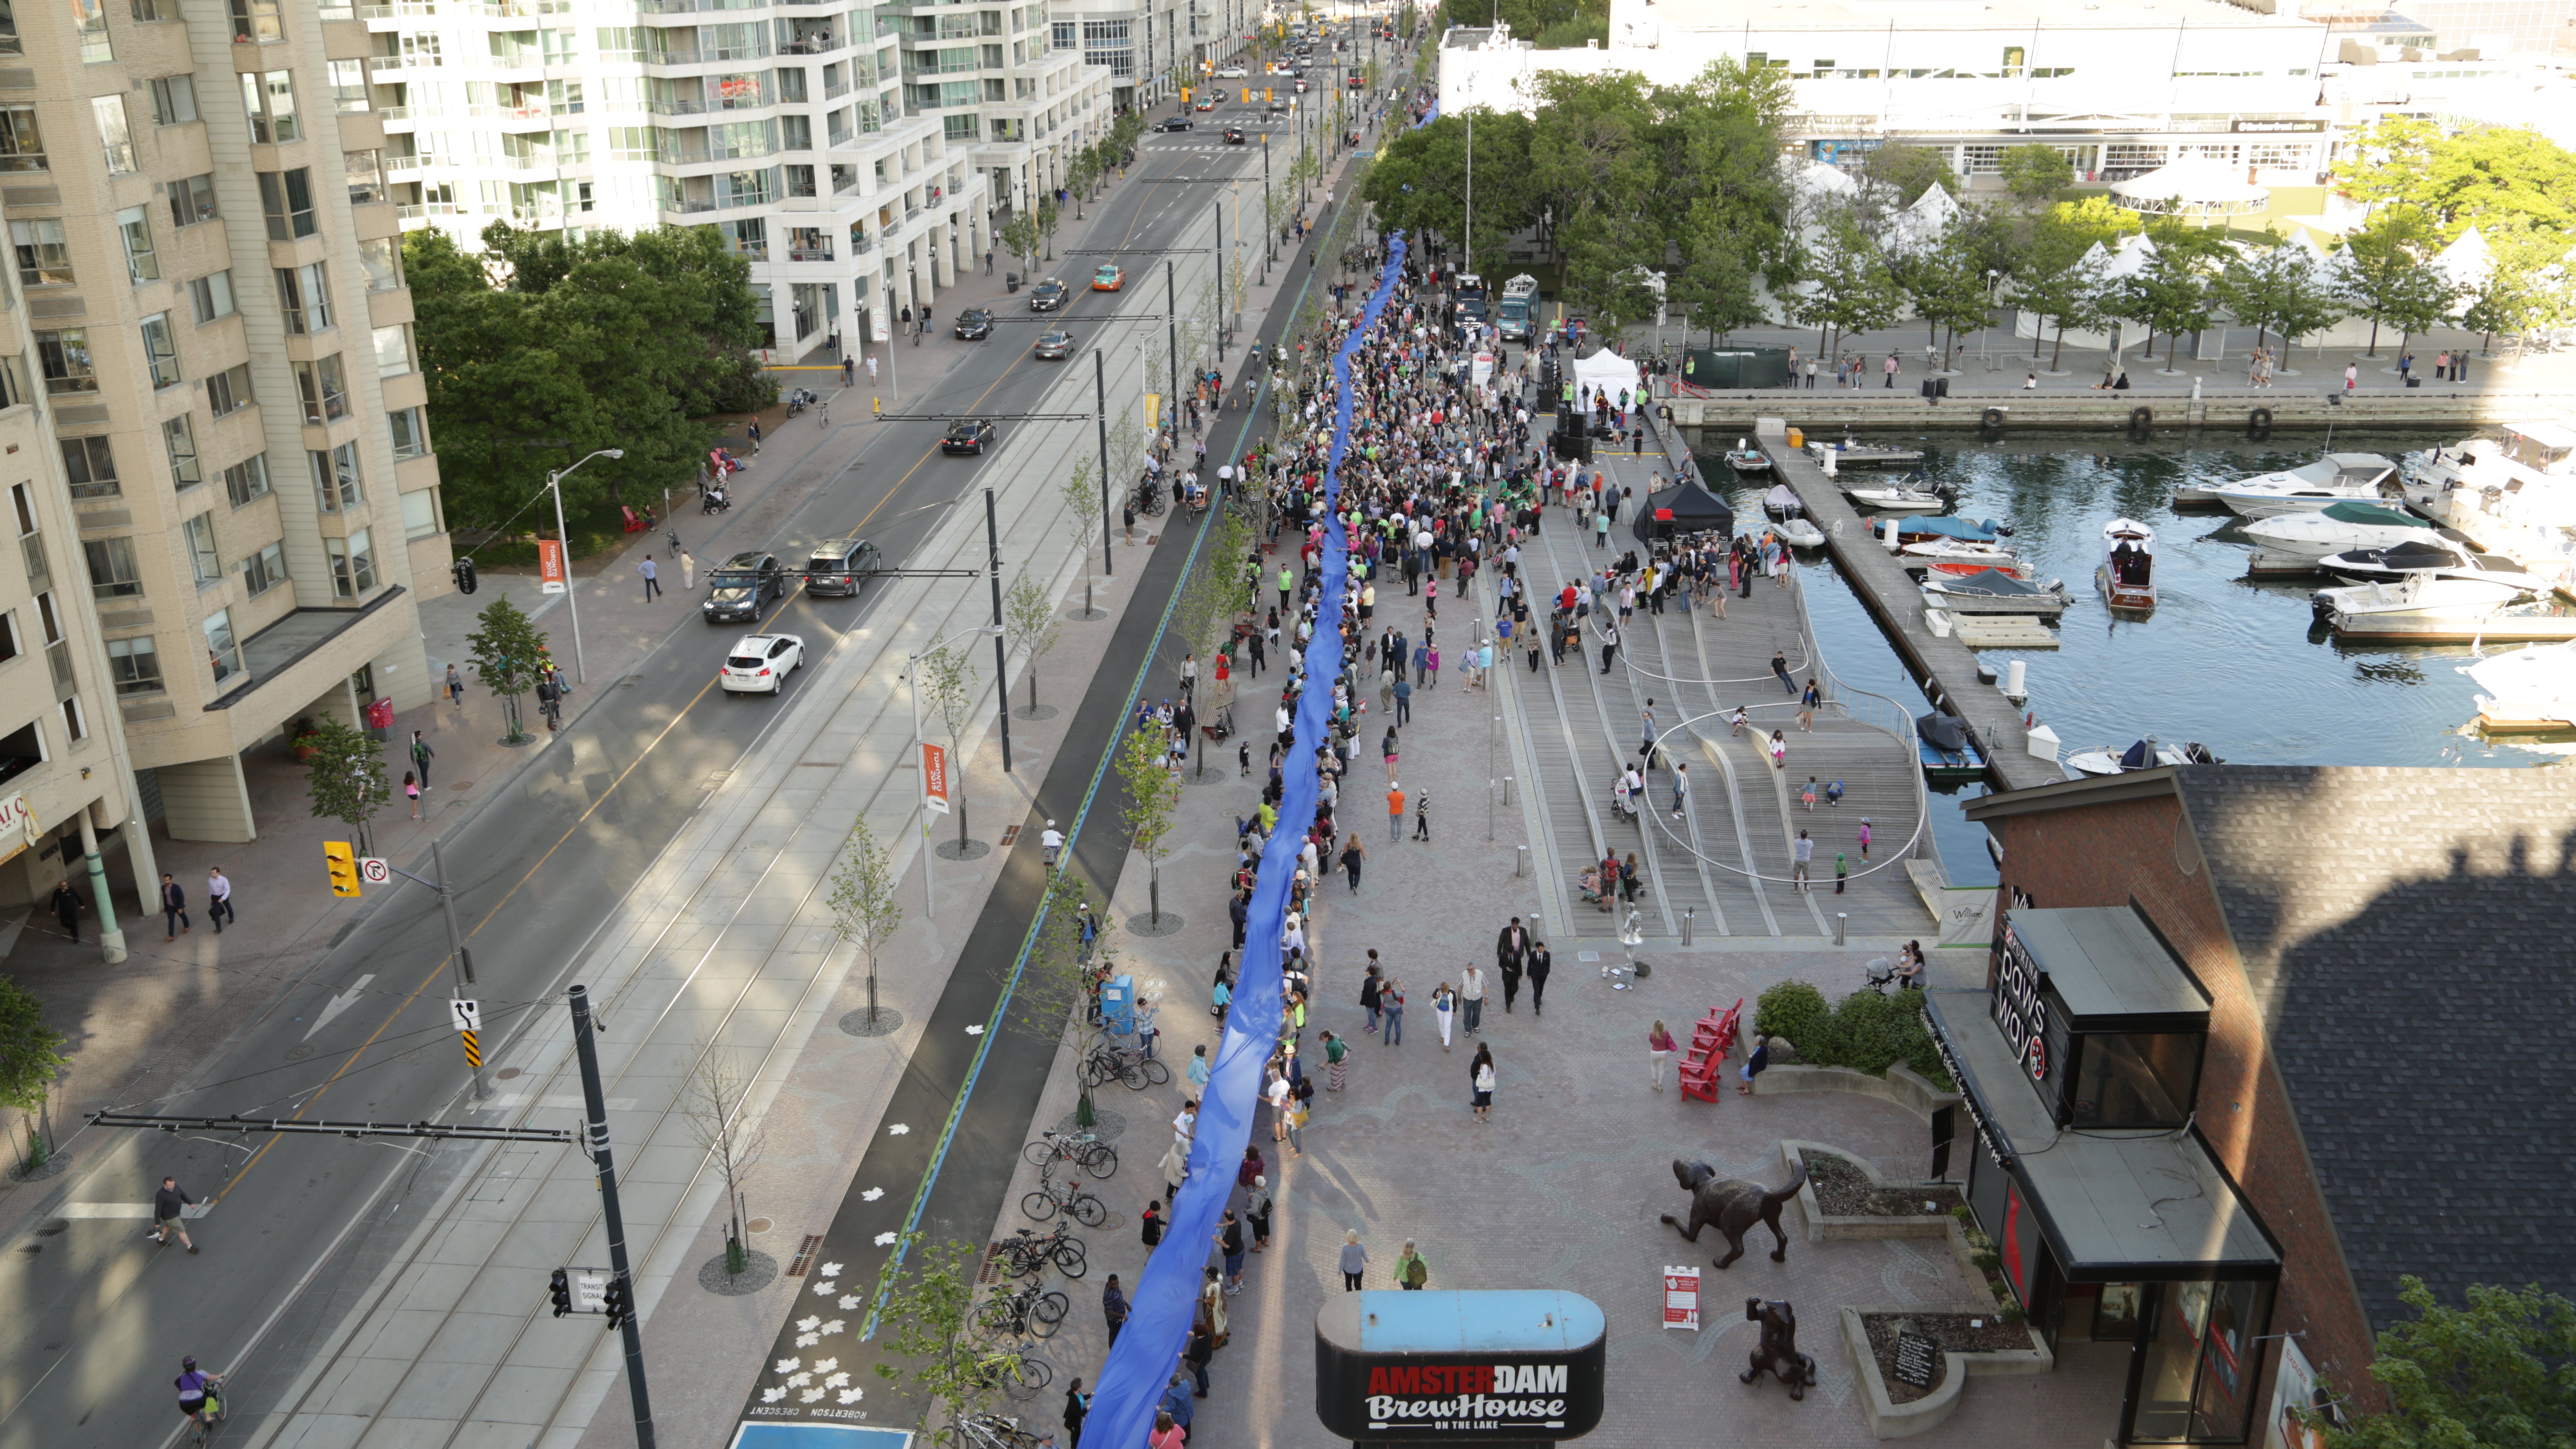 A small section of the 650-metre ribbon passing through the crowd gathered at the Simcoe WaveDeck.